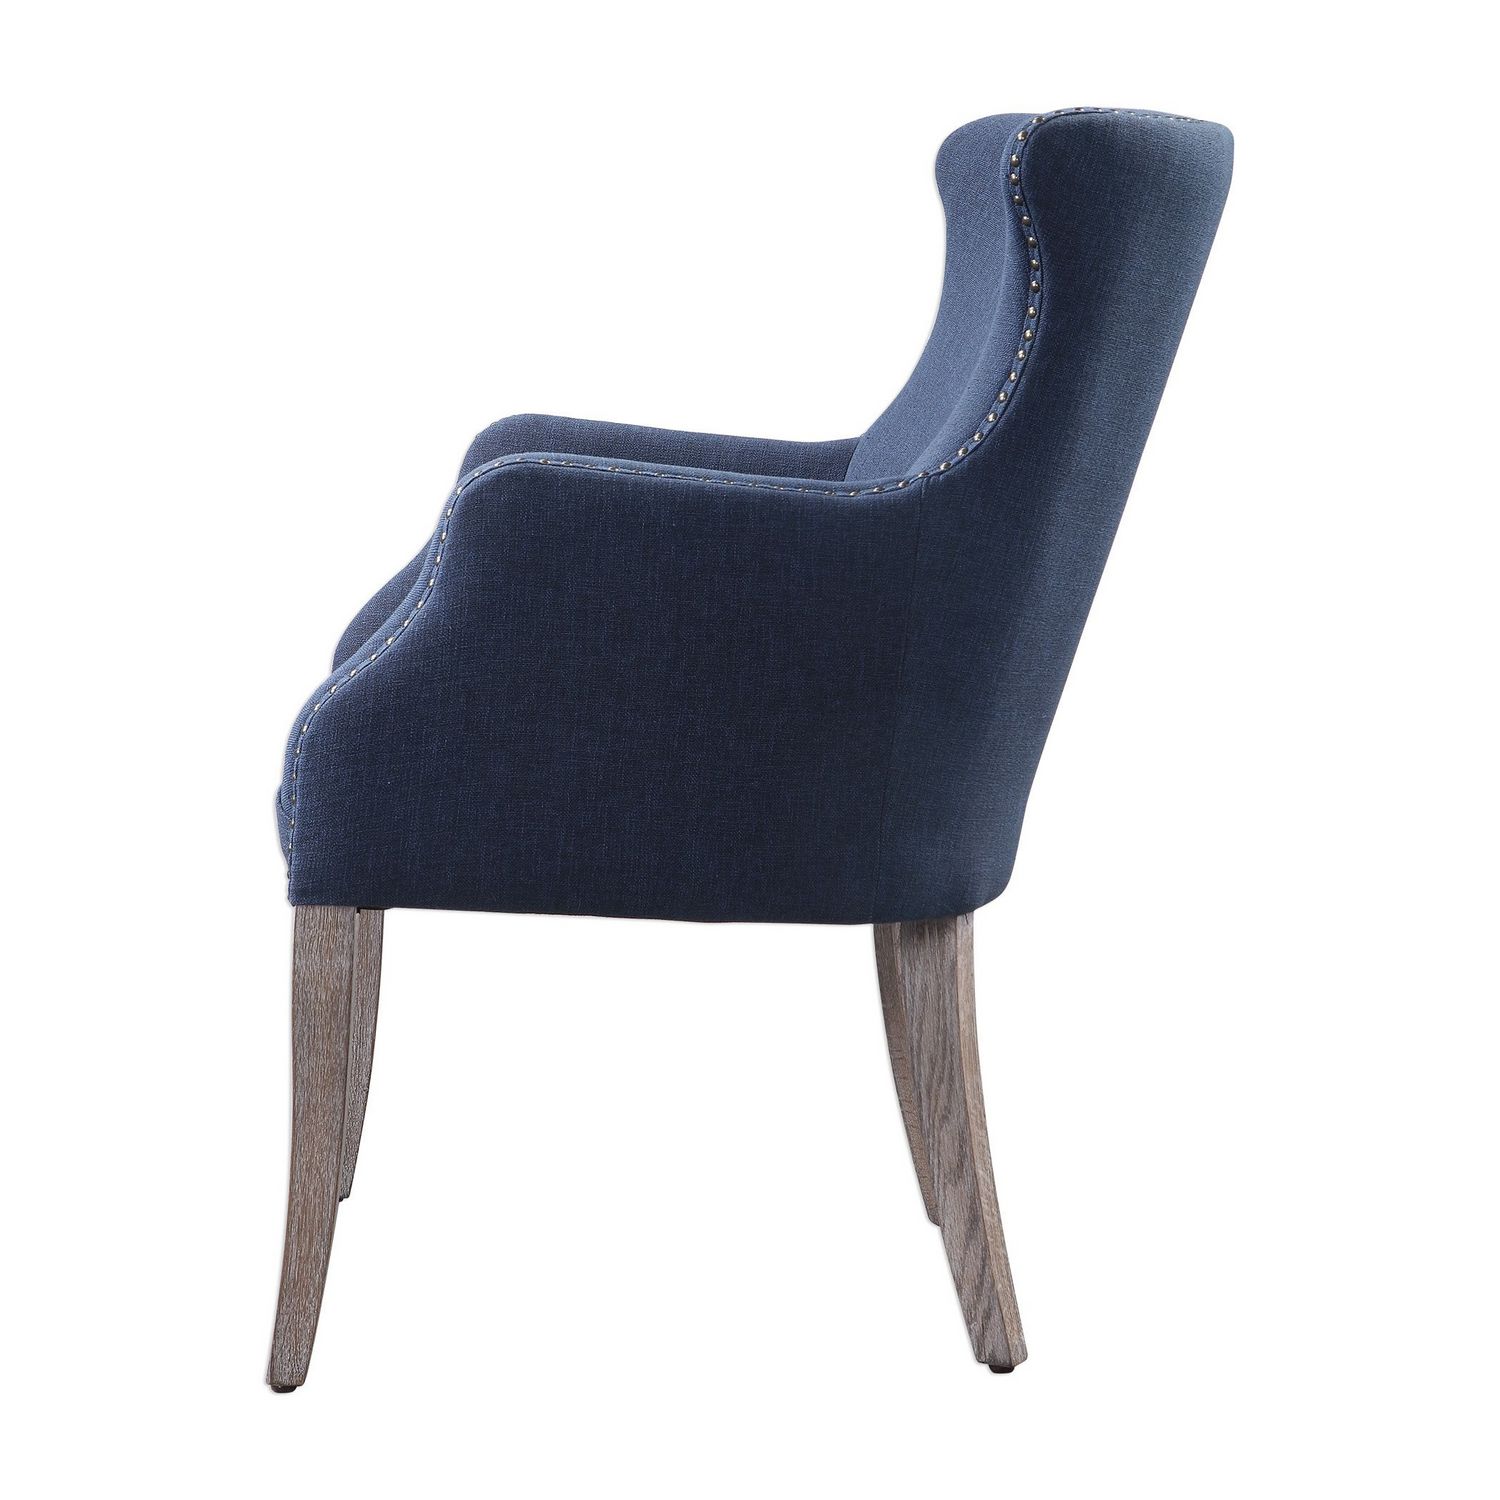 Uttermost Yareena Wing Chair - Blue